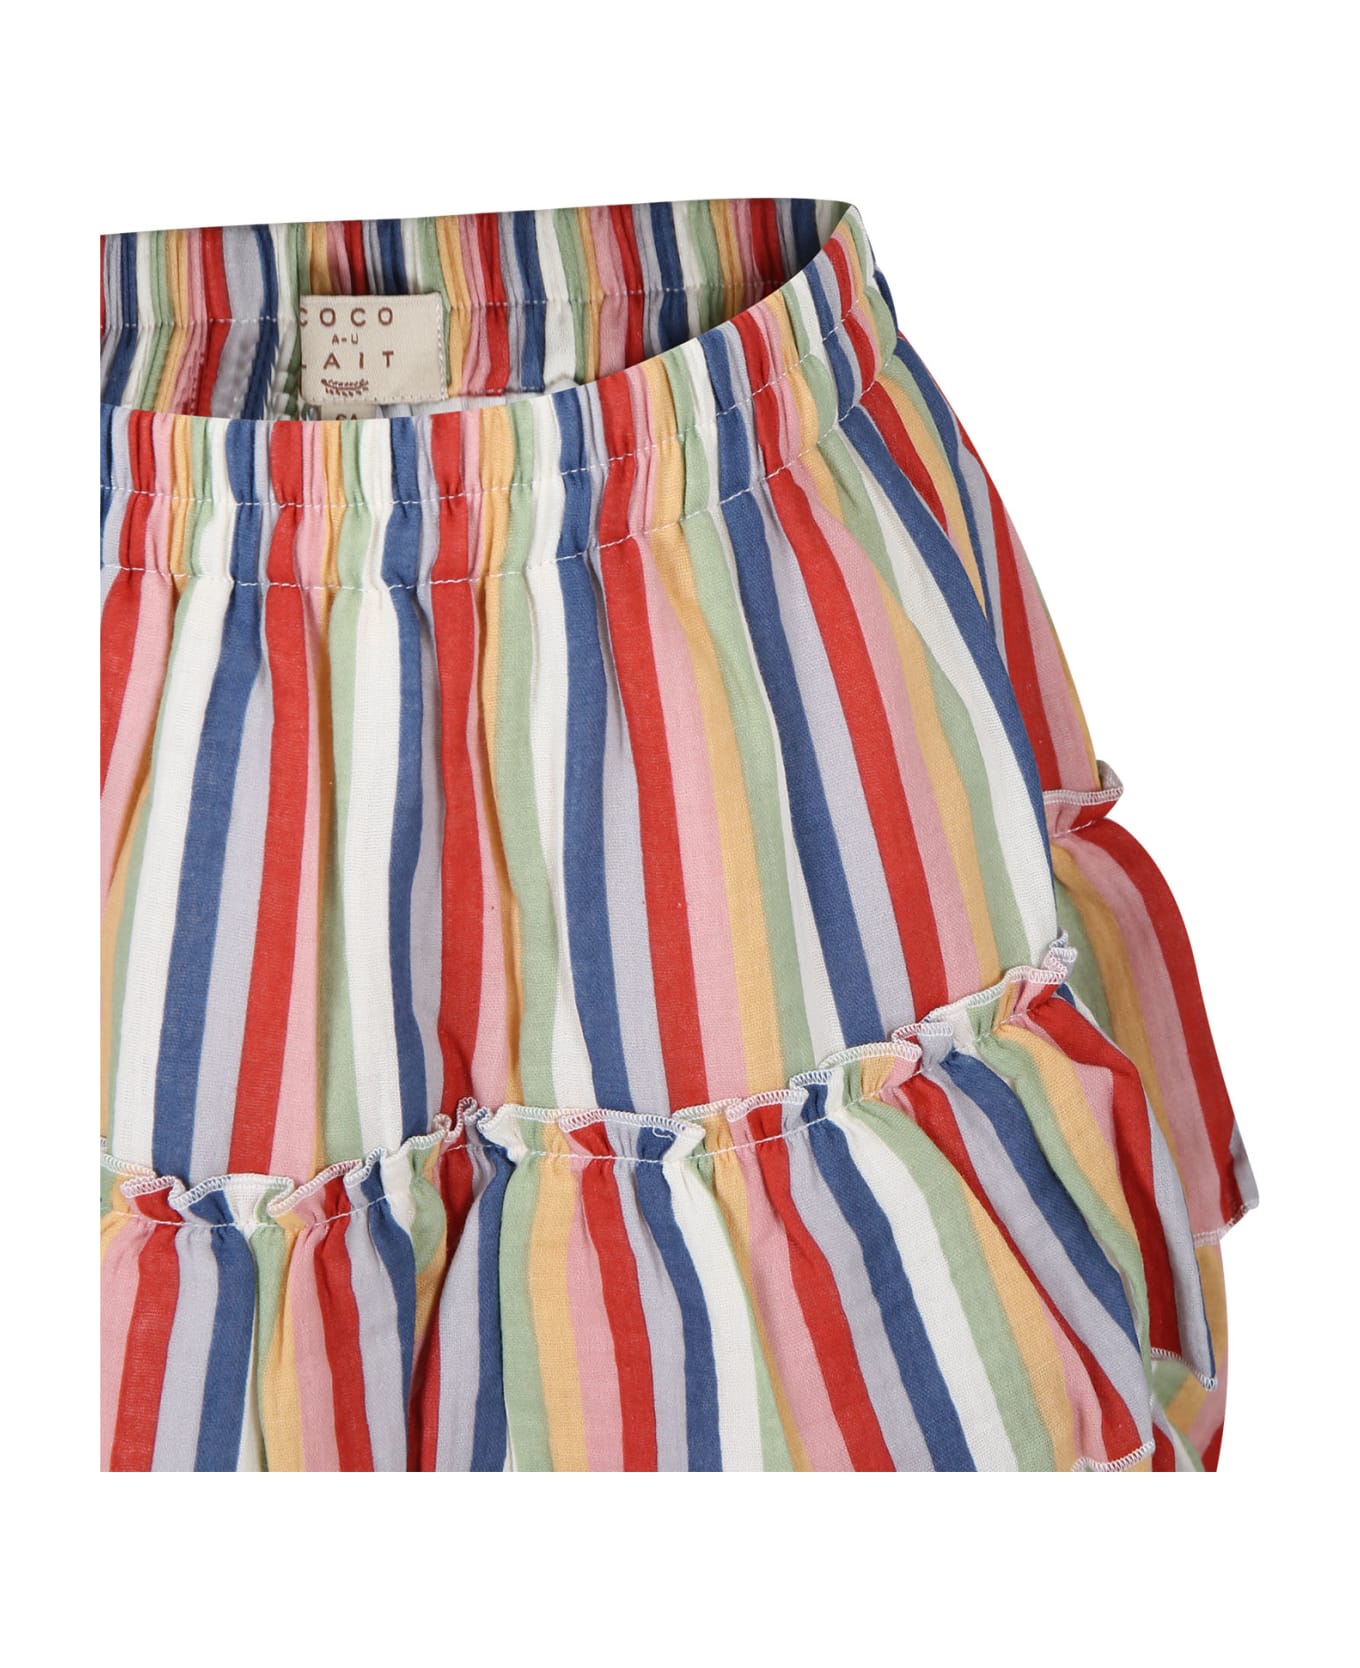 Coco Au Lait Multicolor Skirt For Girl With Stripes Pattern - Multicolor